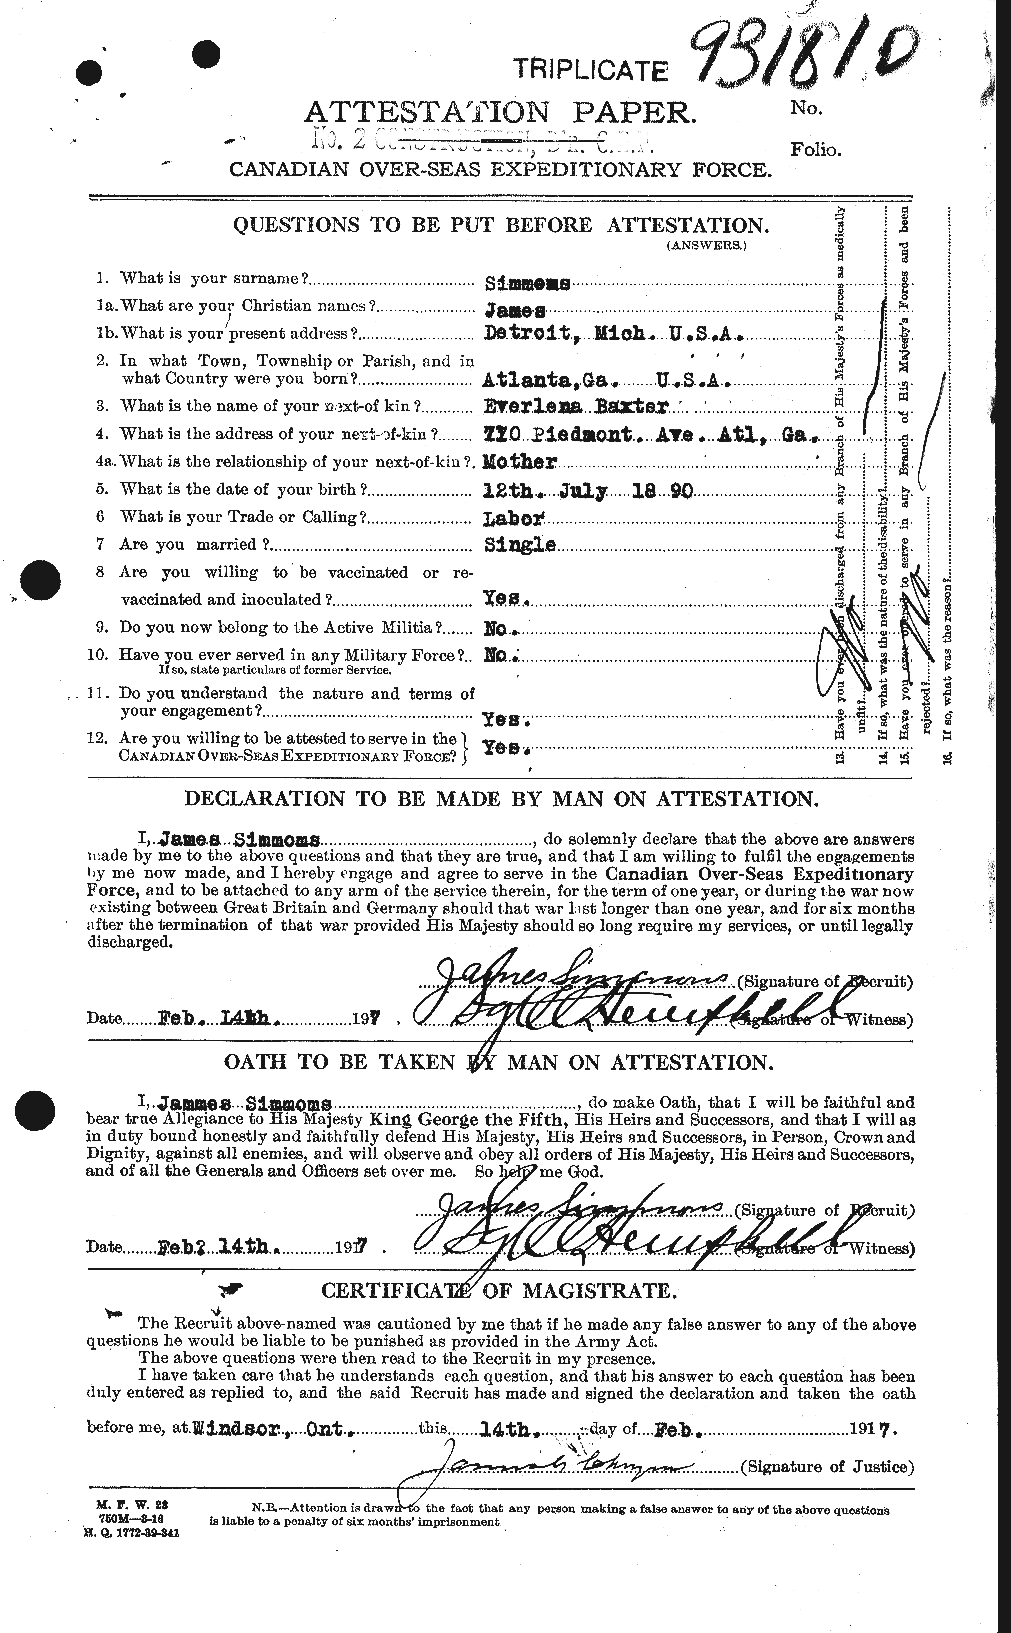 Personnel Records of the First World War - CEF 098674a